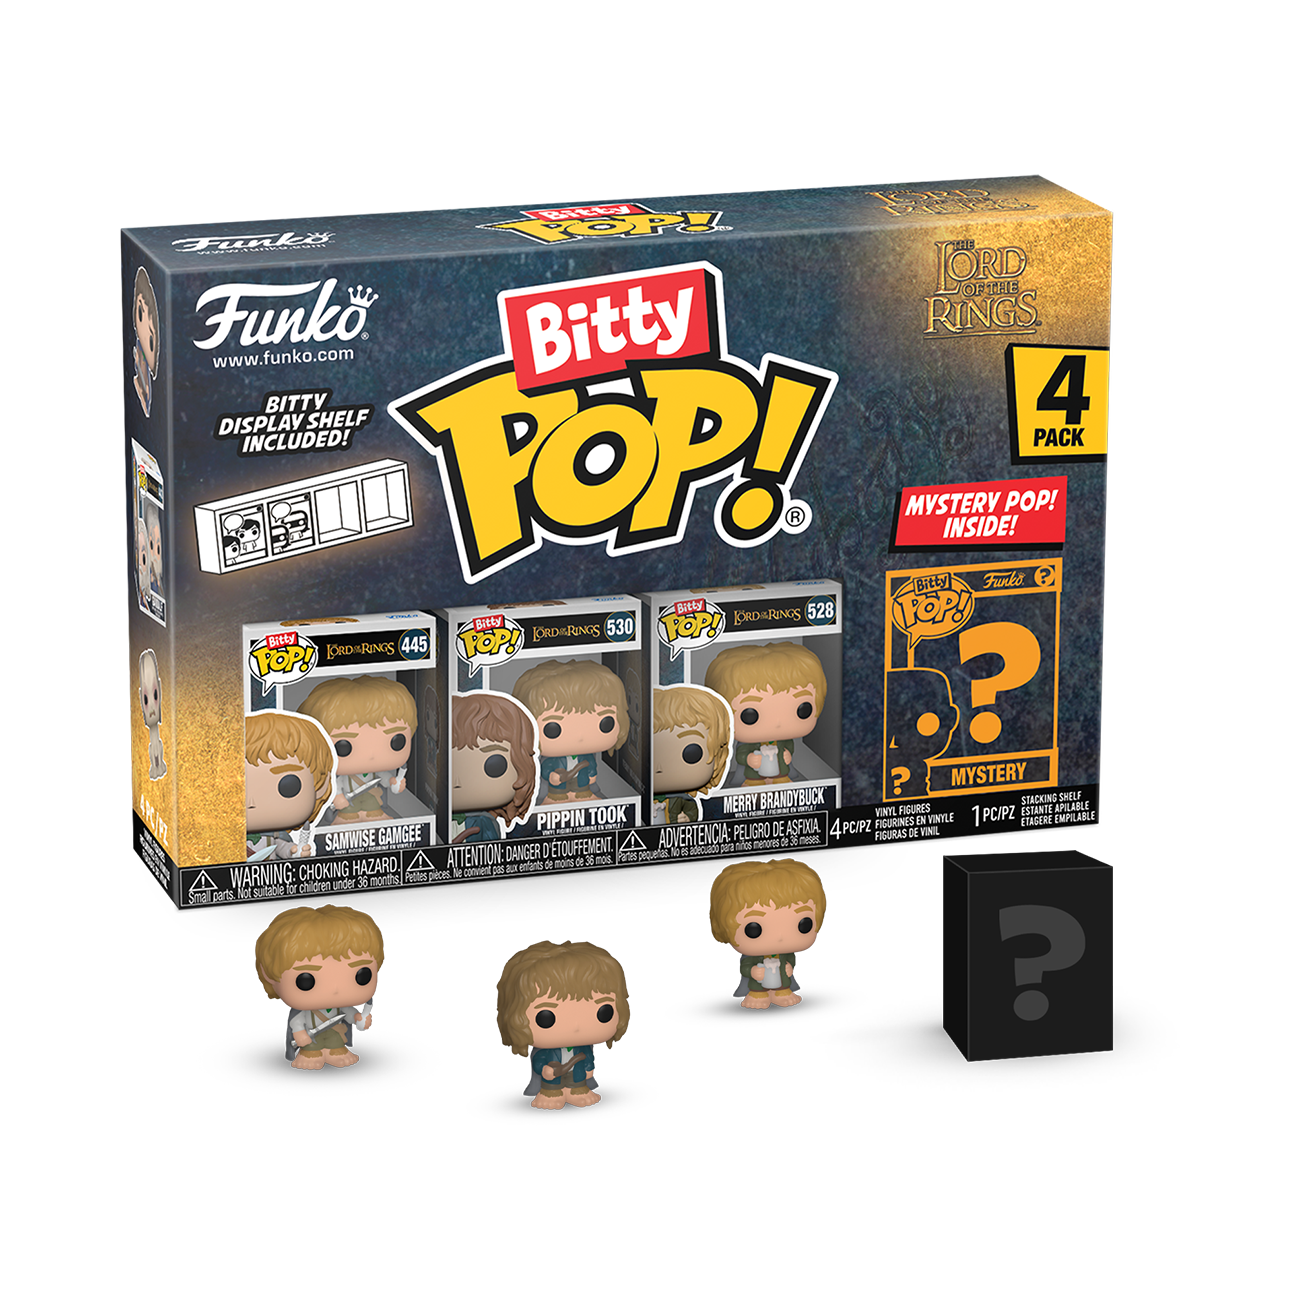 Funko BITTY POP! The Lord Of The Rings 4-Pack Series 3